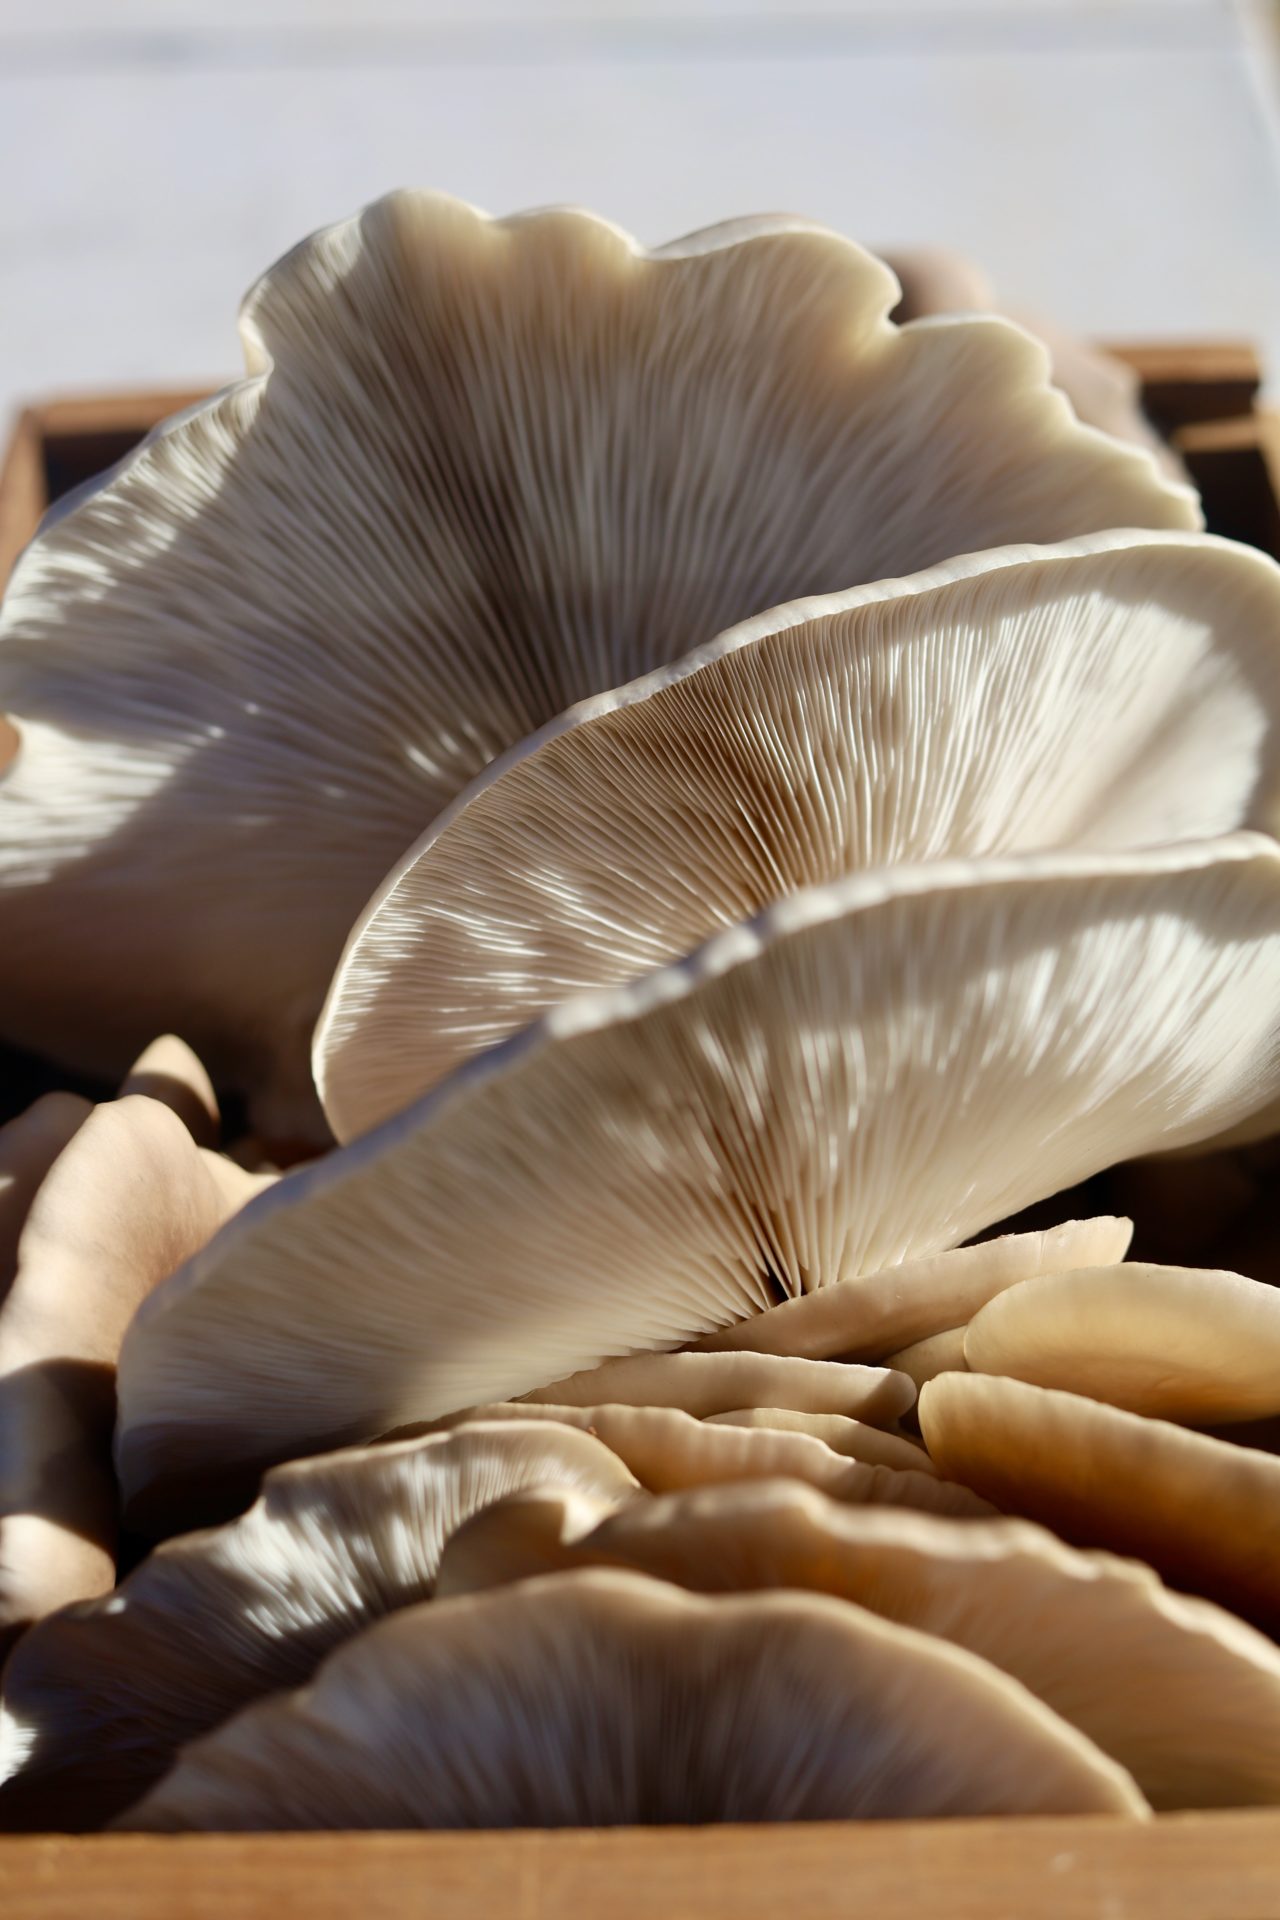 The fungi future is here — at an urban mushroom farm just south of downtown L.A.